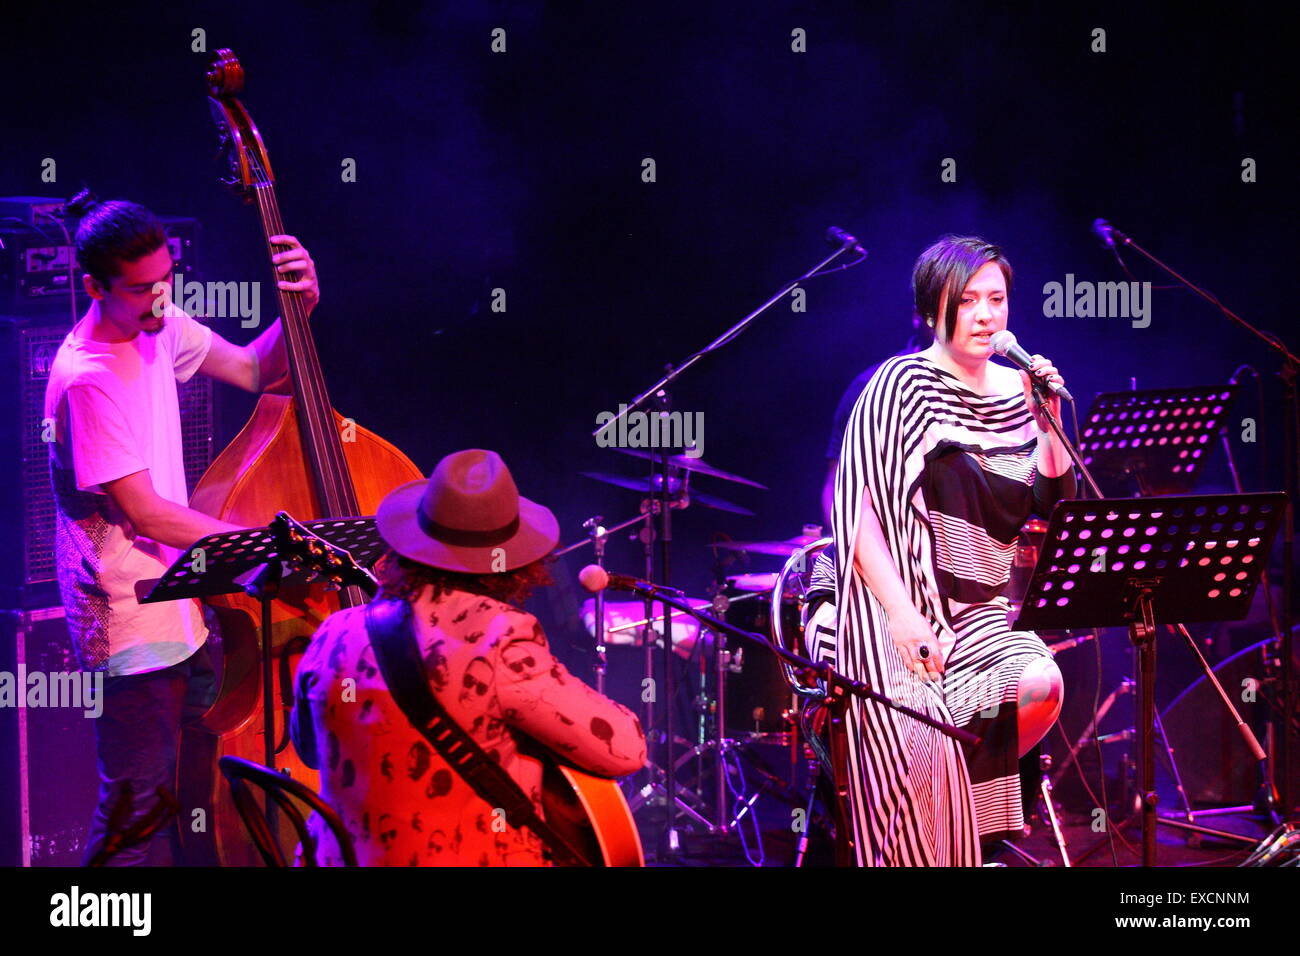 Gdynia, Poland. 11th July, 2015. 10th Ladies' Jazz Festival starts in Gdynia. Mika Urbaniak Quartet performs live on the stage during the first day of the Festival in Gdynia Musical Theatre Credit:  Michal Fludra/Alamy Live News Stock Photo